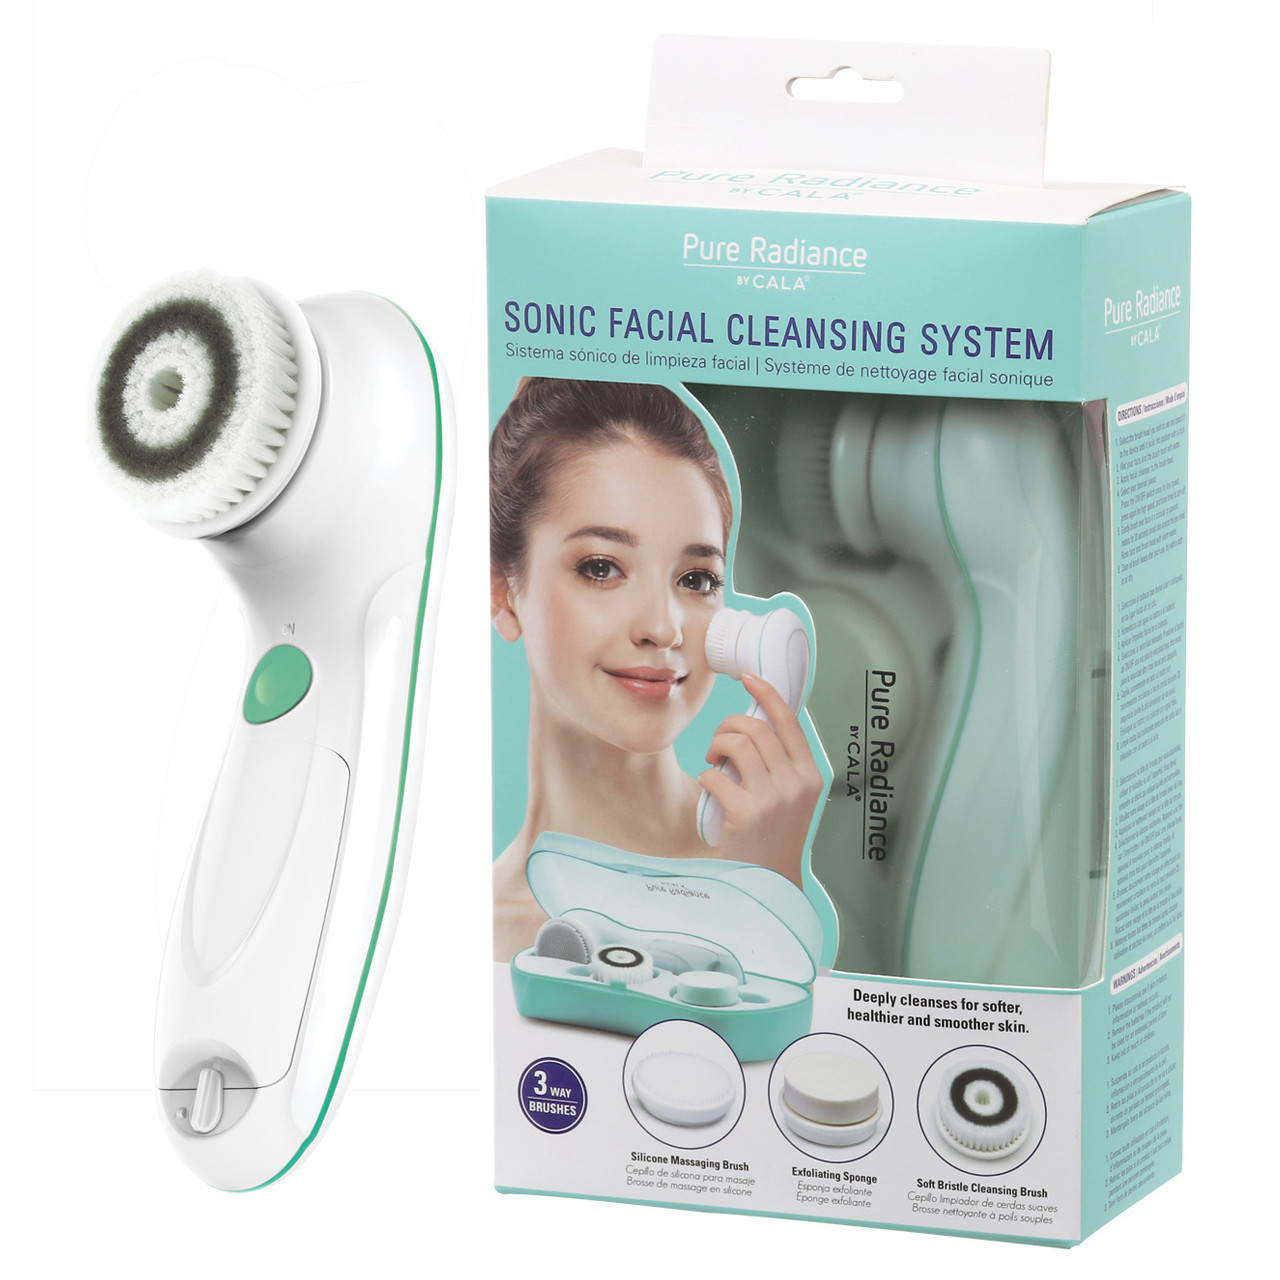 CALA FACE SONIC FACIAL CLEANSING SYSTEM 3 BRUSH 67501